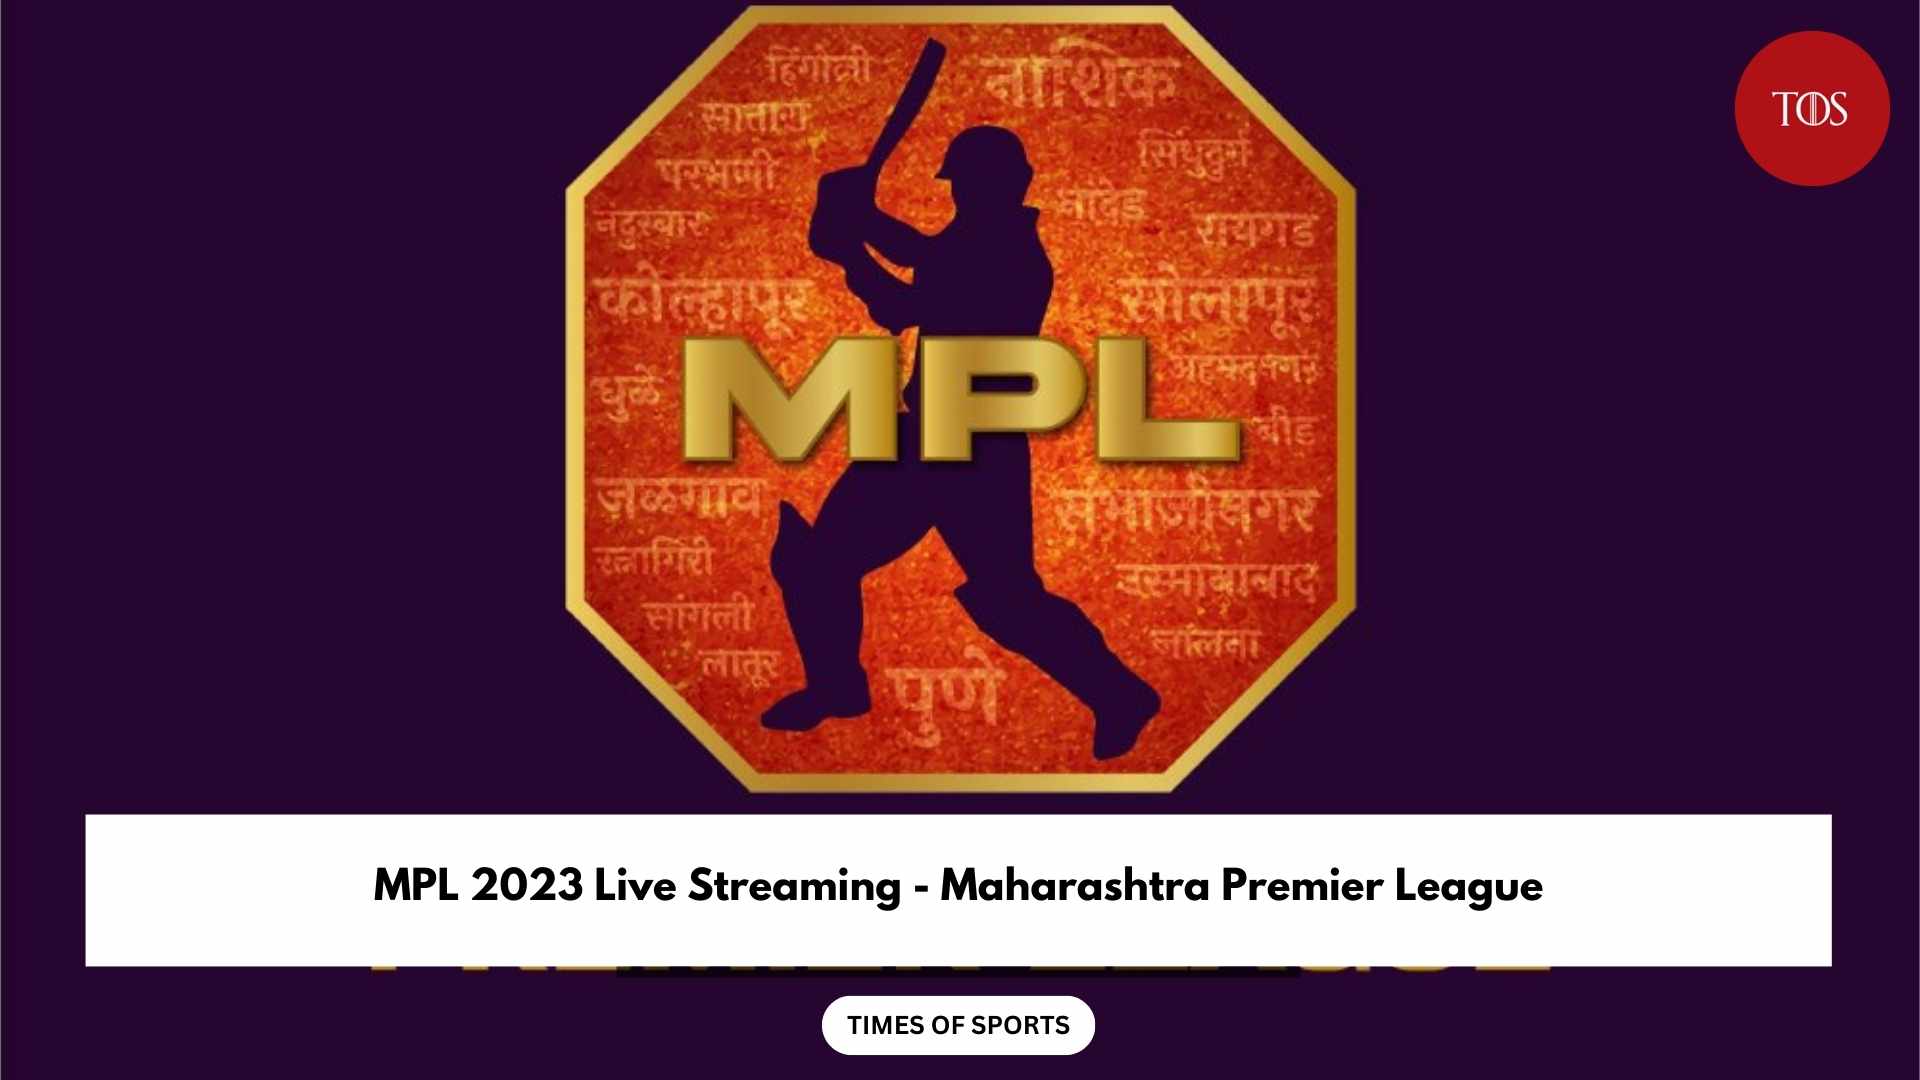 BCCI Names MPL as Official Kit Sponsor of Indian Cricket Team